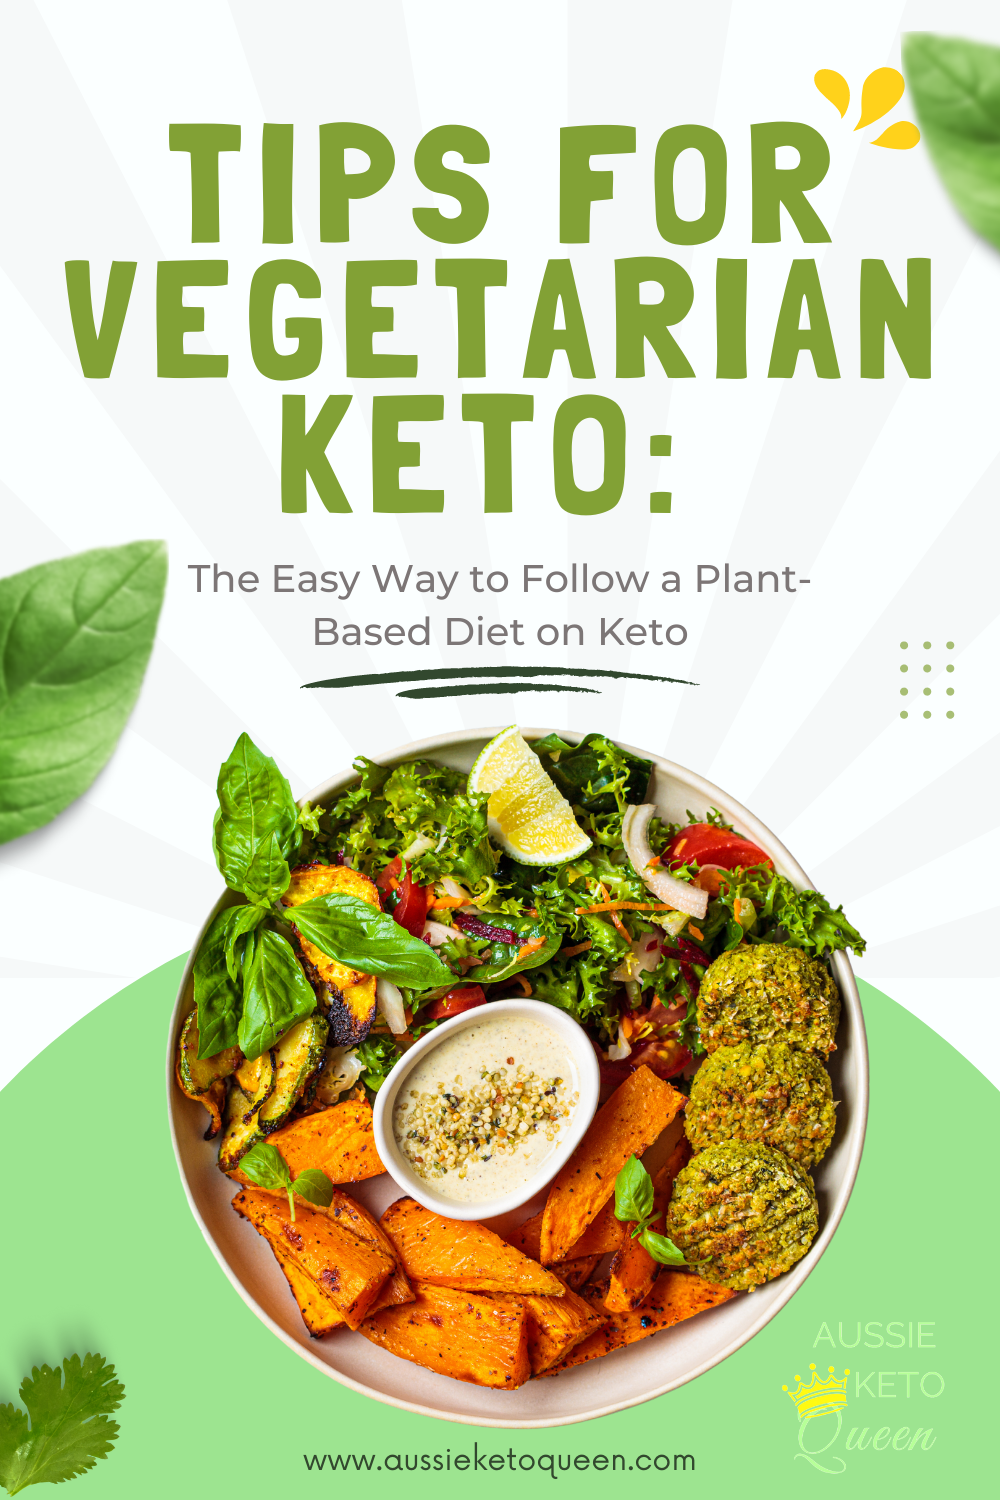 Tips for Vegetarian Keto: The Easy Way to Follow a Plant-Based Diet on Keto